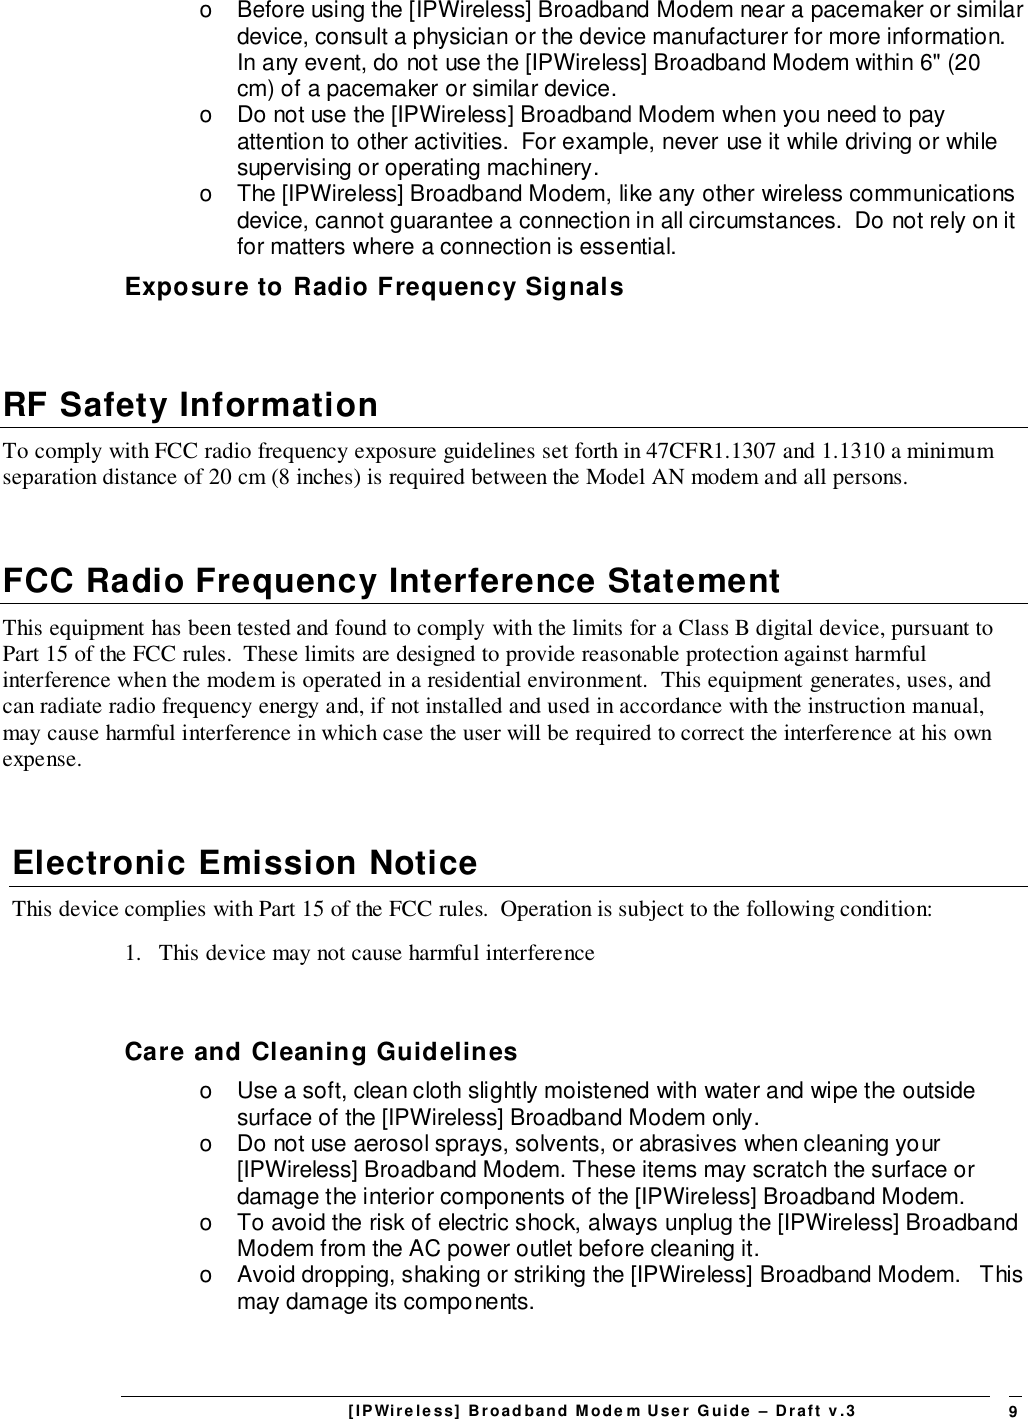 [IPWireless] Broadband Modem User Guide – Draft v.3 9o  Before using the [IPWireless] Broadband Modem near a pacemaker or similardevice, consult a physician or the device manufacturer for more information.In any event, do not use the [IPWireless] Broadband Modem within 6&quot; (20cm) of a pacemaker or similar device.o  Do not use the [IPWireless] Broadband Modem when you need to payattention to other activities.  For example, never use it while driving or whilesupervising or operating machinery.o  The [IPWireless] Broadband Modem, like any other wireless communicationsdevice, cannot guarantee a connection in all circumstances.  Do not rely on itfor matters where a connection is essential.Exposure to Radio Frequency SignalsRF Safety InformationTo comply with FCC radio frequency exposure guidelines set forth in 47CFR1.1307 and 1.1310 a minimumseparation distance of 20 cm (8 inches) is required between the Model AN modem and all persons.FCC Radio Frequency Interference StatementThis equipment has been tested and found to comply with the limits for a Class B digital device, pursuant toPart 15 of the FCC rules.  These limits are designed to provide reasonable protection against harmfulinterference when the modem is operated in a residential environment.  This equipment generates, uses, andcan radiate radio frequency energy and, if not installed and used in accordance with the instruction manual,may cause harmful interference in which case the user will be required to correct the interference at his ownexpense.Electronic Emission NoticeThis device complies with Part 15 of the FCC rules.  Operation is subject to the following condition:1.   This device may not cause harmful interferenceCare and Cleaning Guidelineso  Use a soft, clean cloth slightly moistened with water and wipe the outsidesurface of the [IPWireless] Broadband Modem only.o  Do not use aerosol sprays, solvents, or abrasives when cleaning your[IPWireless] Broadband Modem. These items may scratch the surface ordamage the interior components of the [IPWireless] Broadband Modem.o  To avoid the risk of electric shock, always unplug the [IPWireless] BroadbandModem from the AC power outlet before cleaning it.o  Avoid dropping, shaking or striking the [IPWireless] Broadband Modem.   Thismay damage its components.